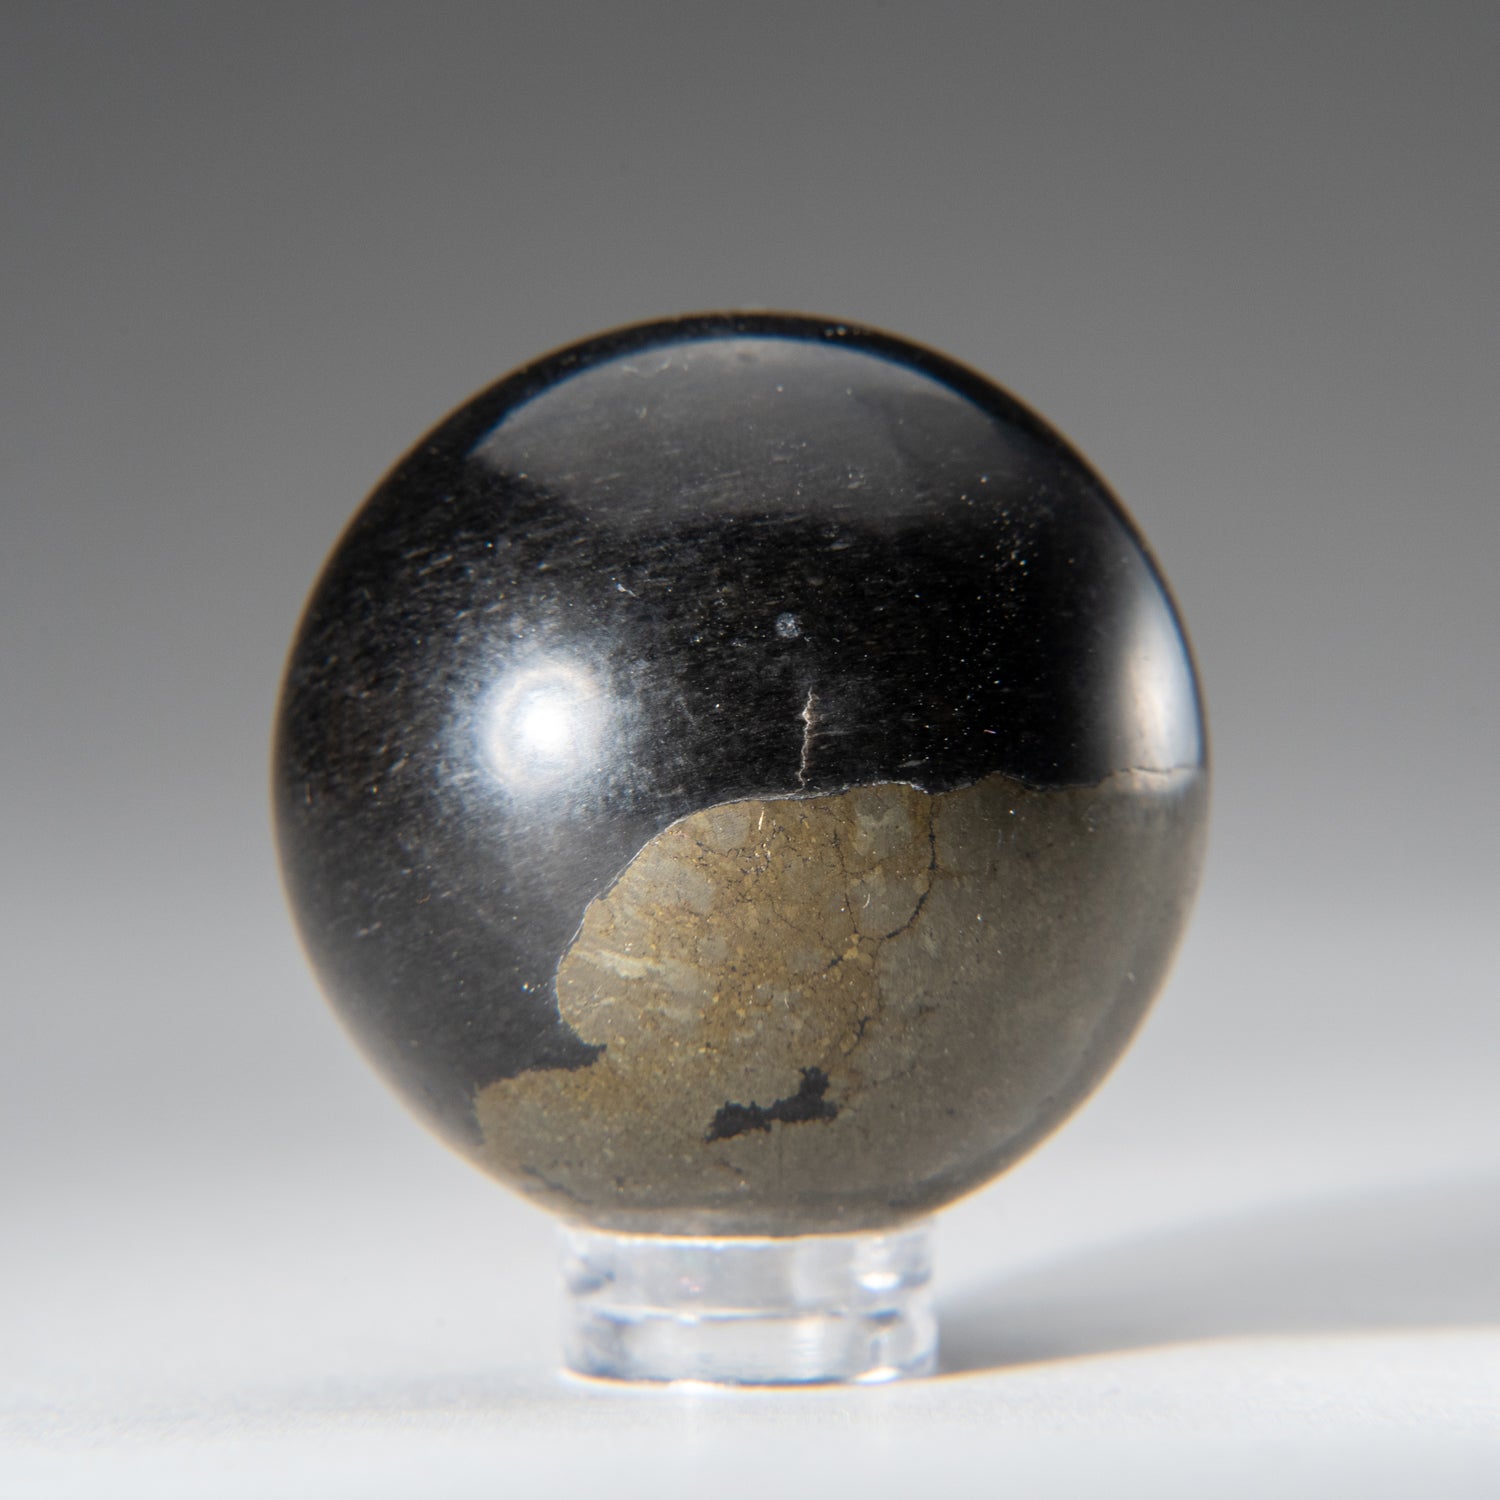 Genuine Polished Pyrite Stone Sphere (1.25") with Acrylic Display Stand